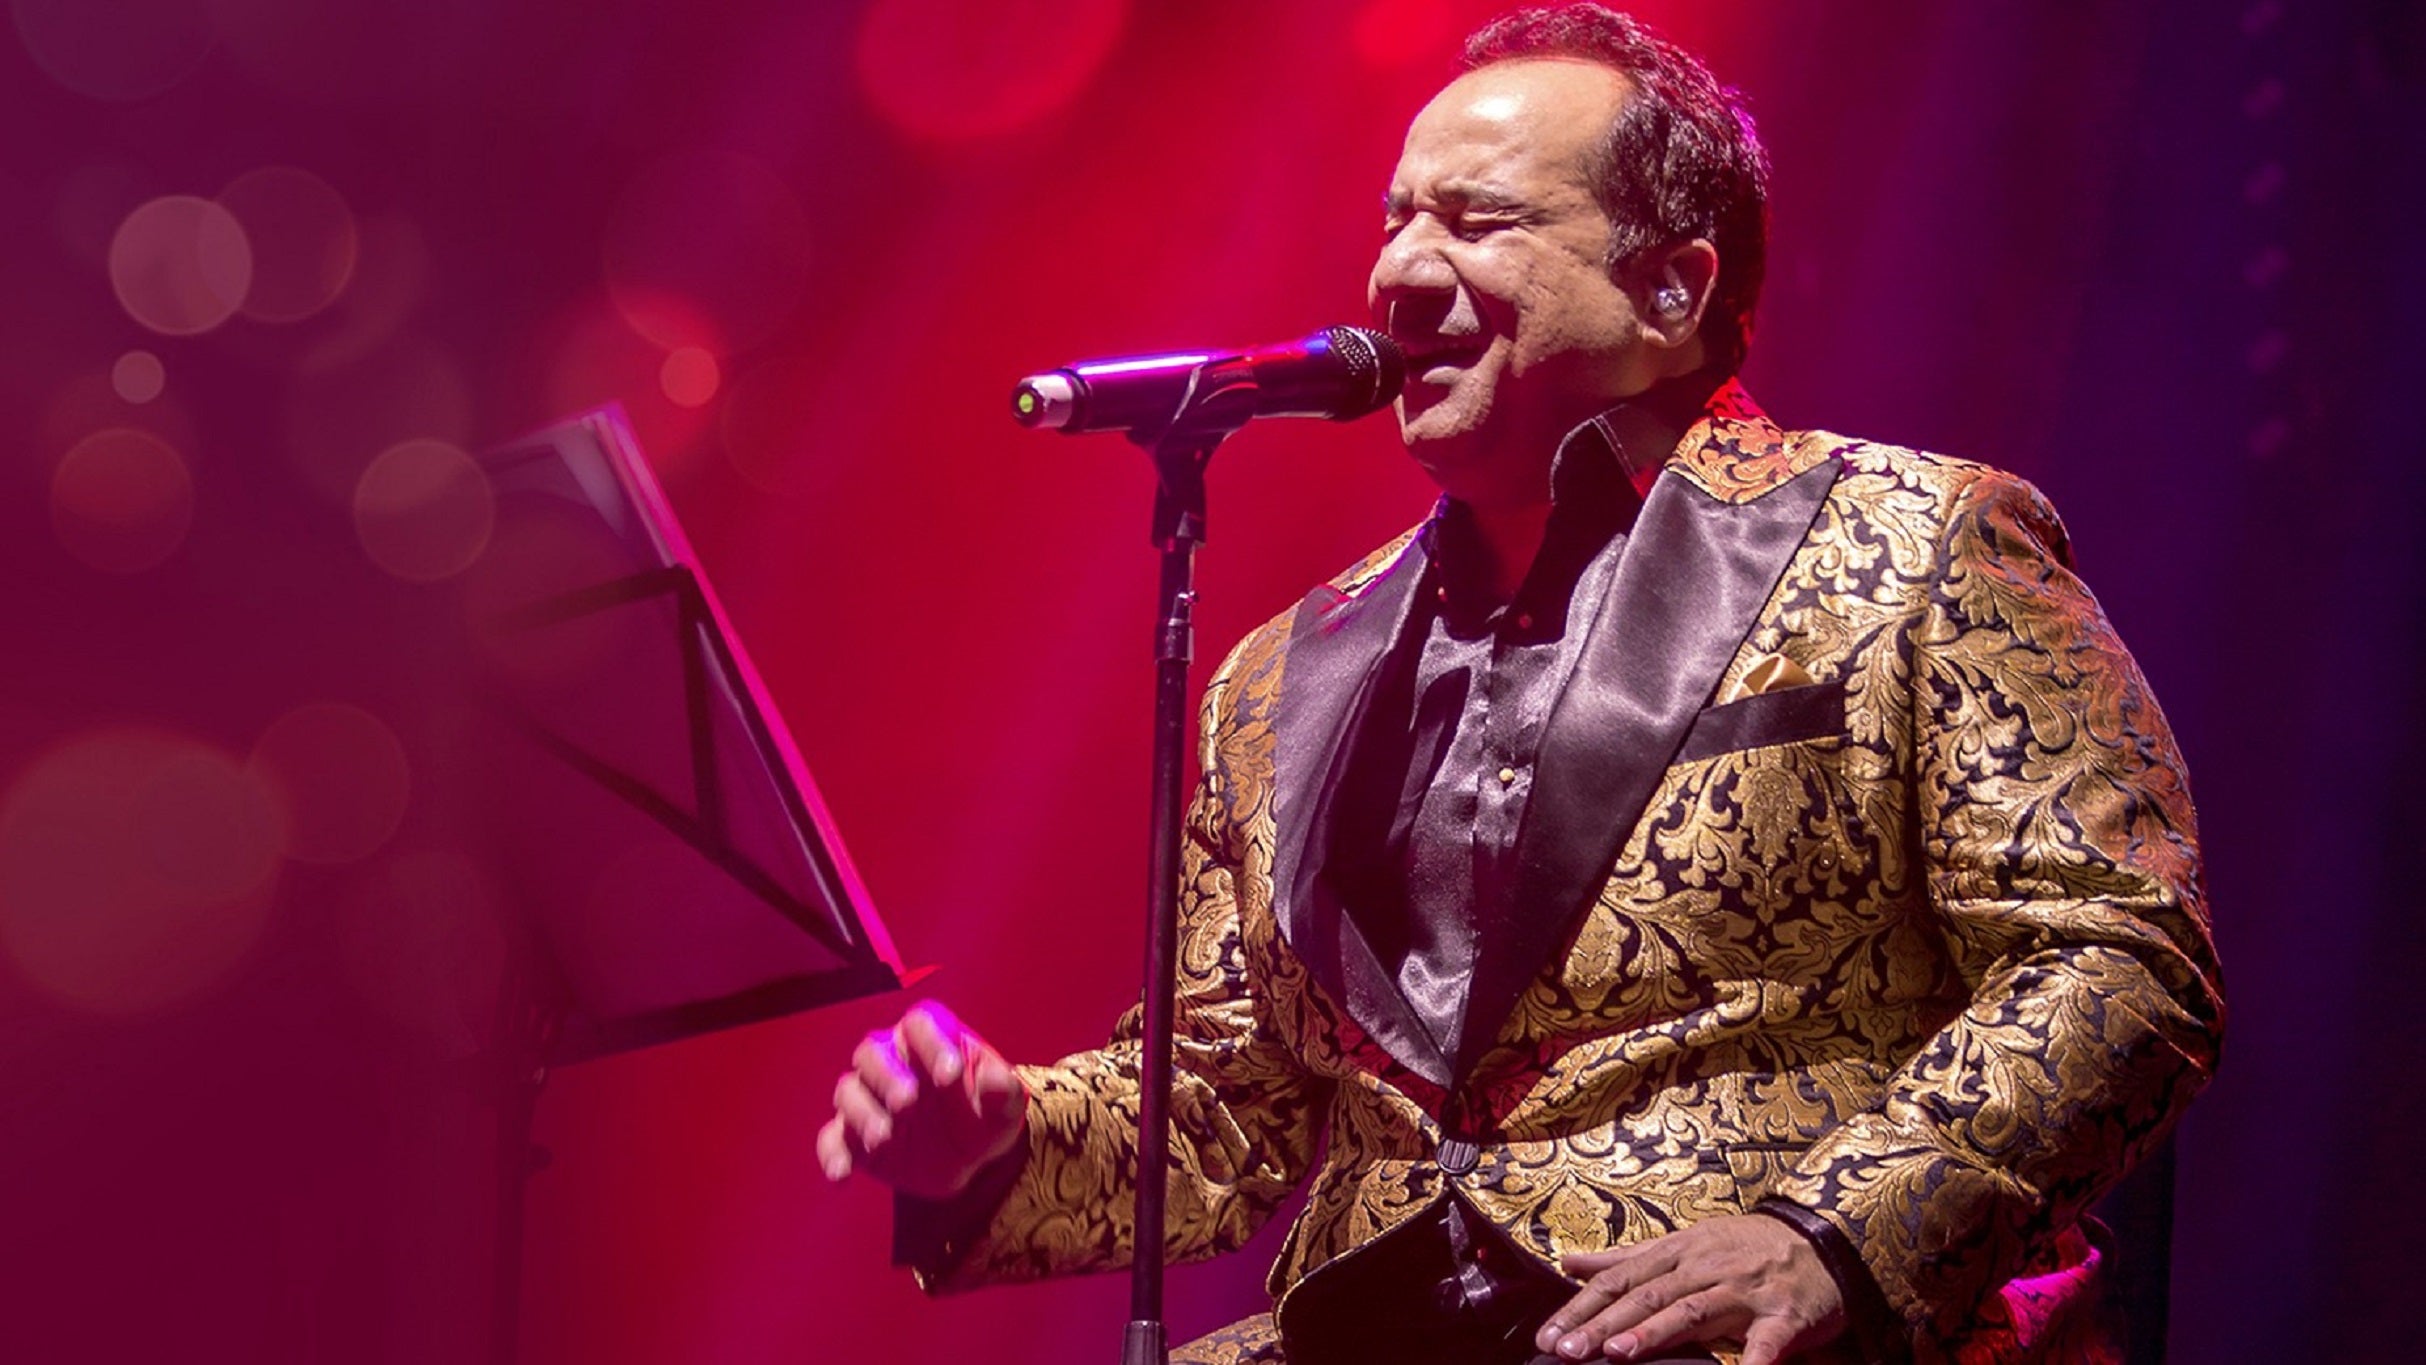 Rahat Fateh Ali Khan in Irving promo photo for Official Platinum Onsale presale offer code